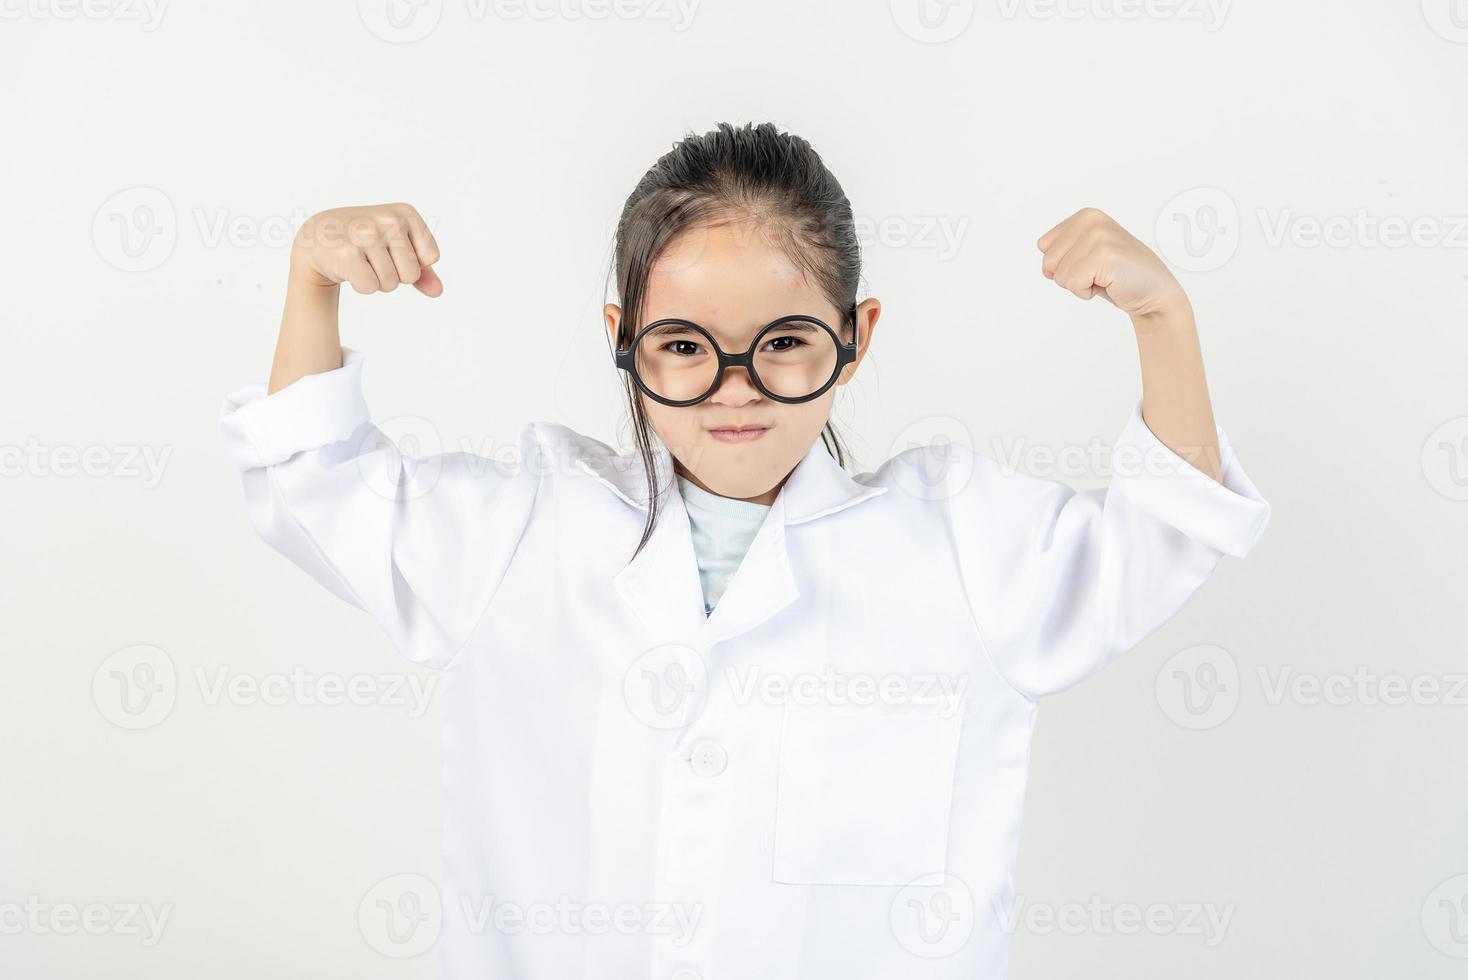 smart doctor Little Girl with white medical coat photo